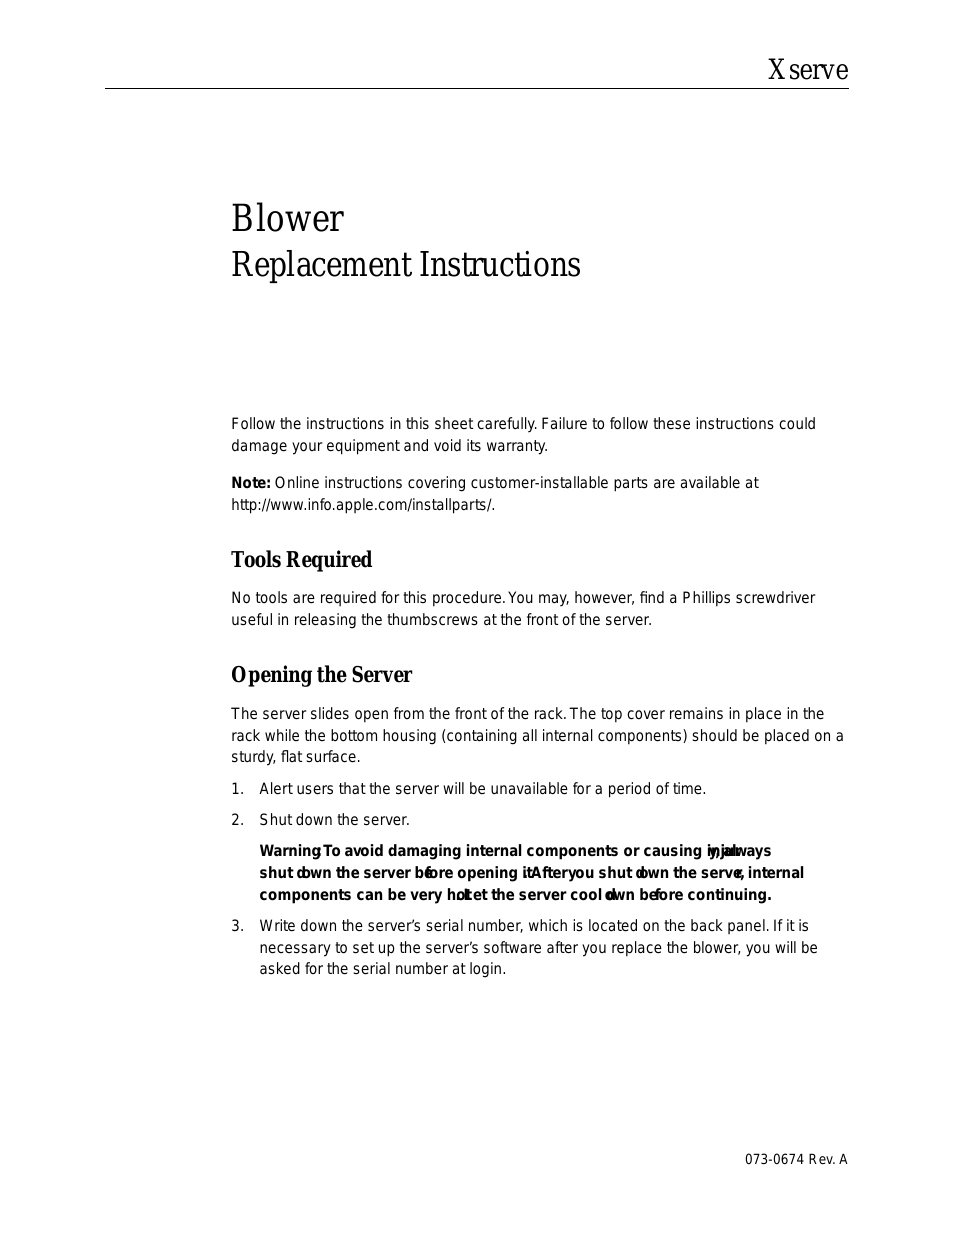 Xserve (Blower Replacement) (Page 1)